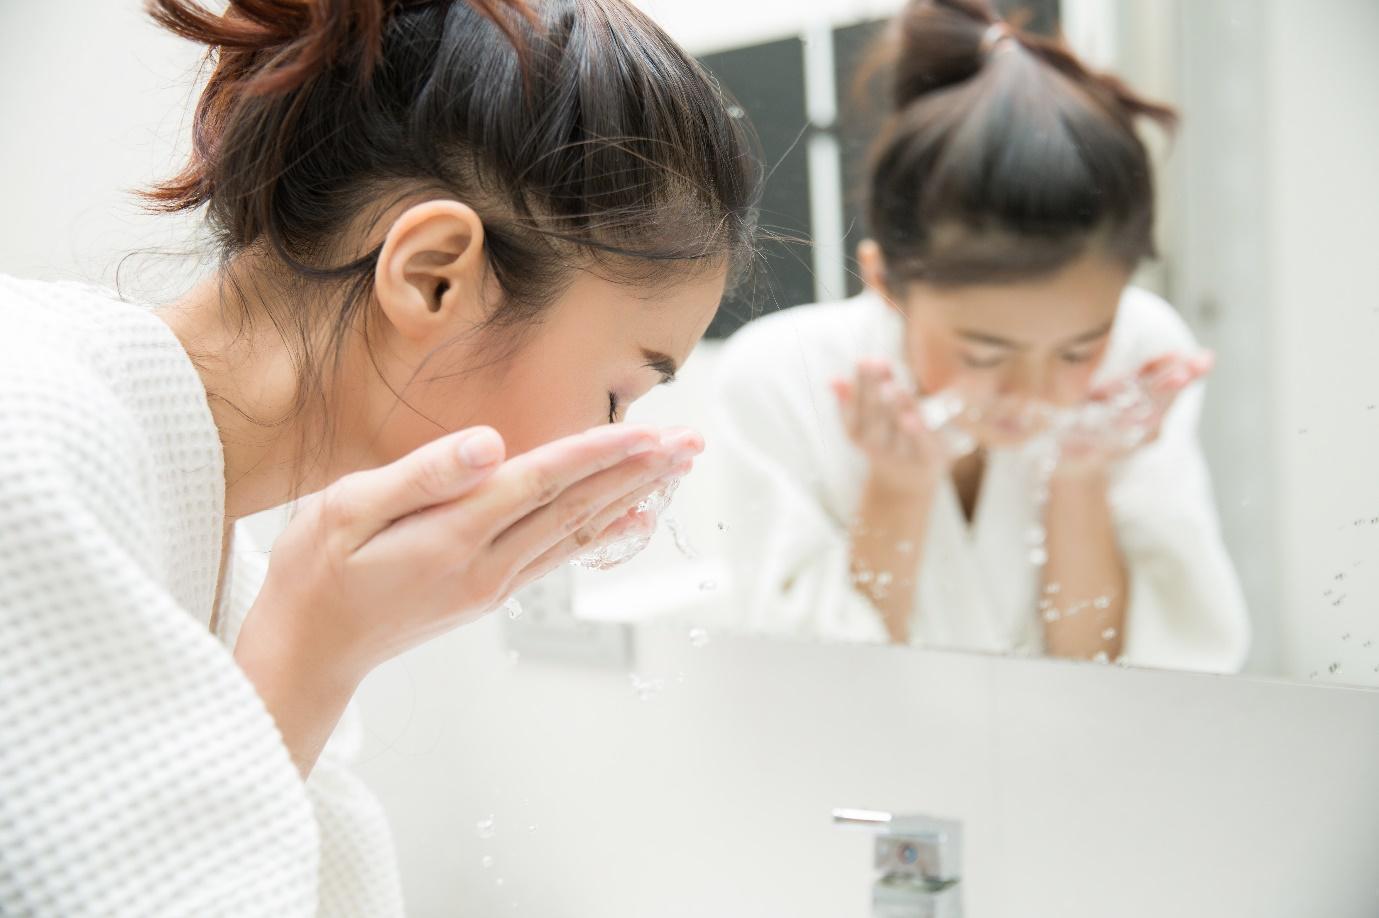 How to Shortlist a Toxin-free Face Wash for Dry Skin